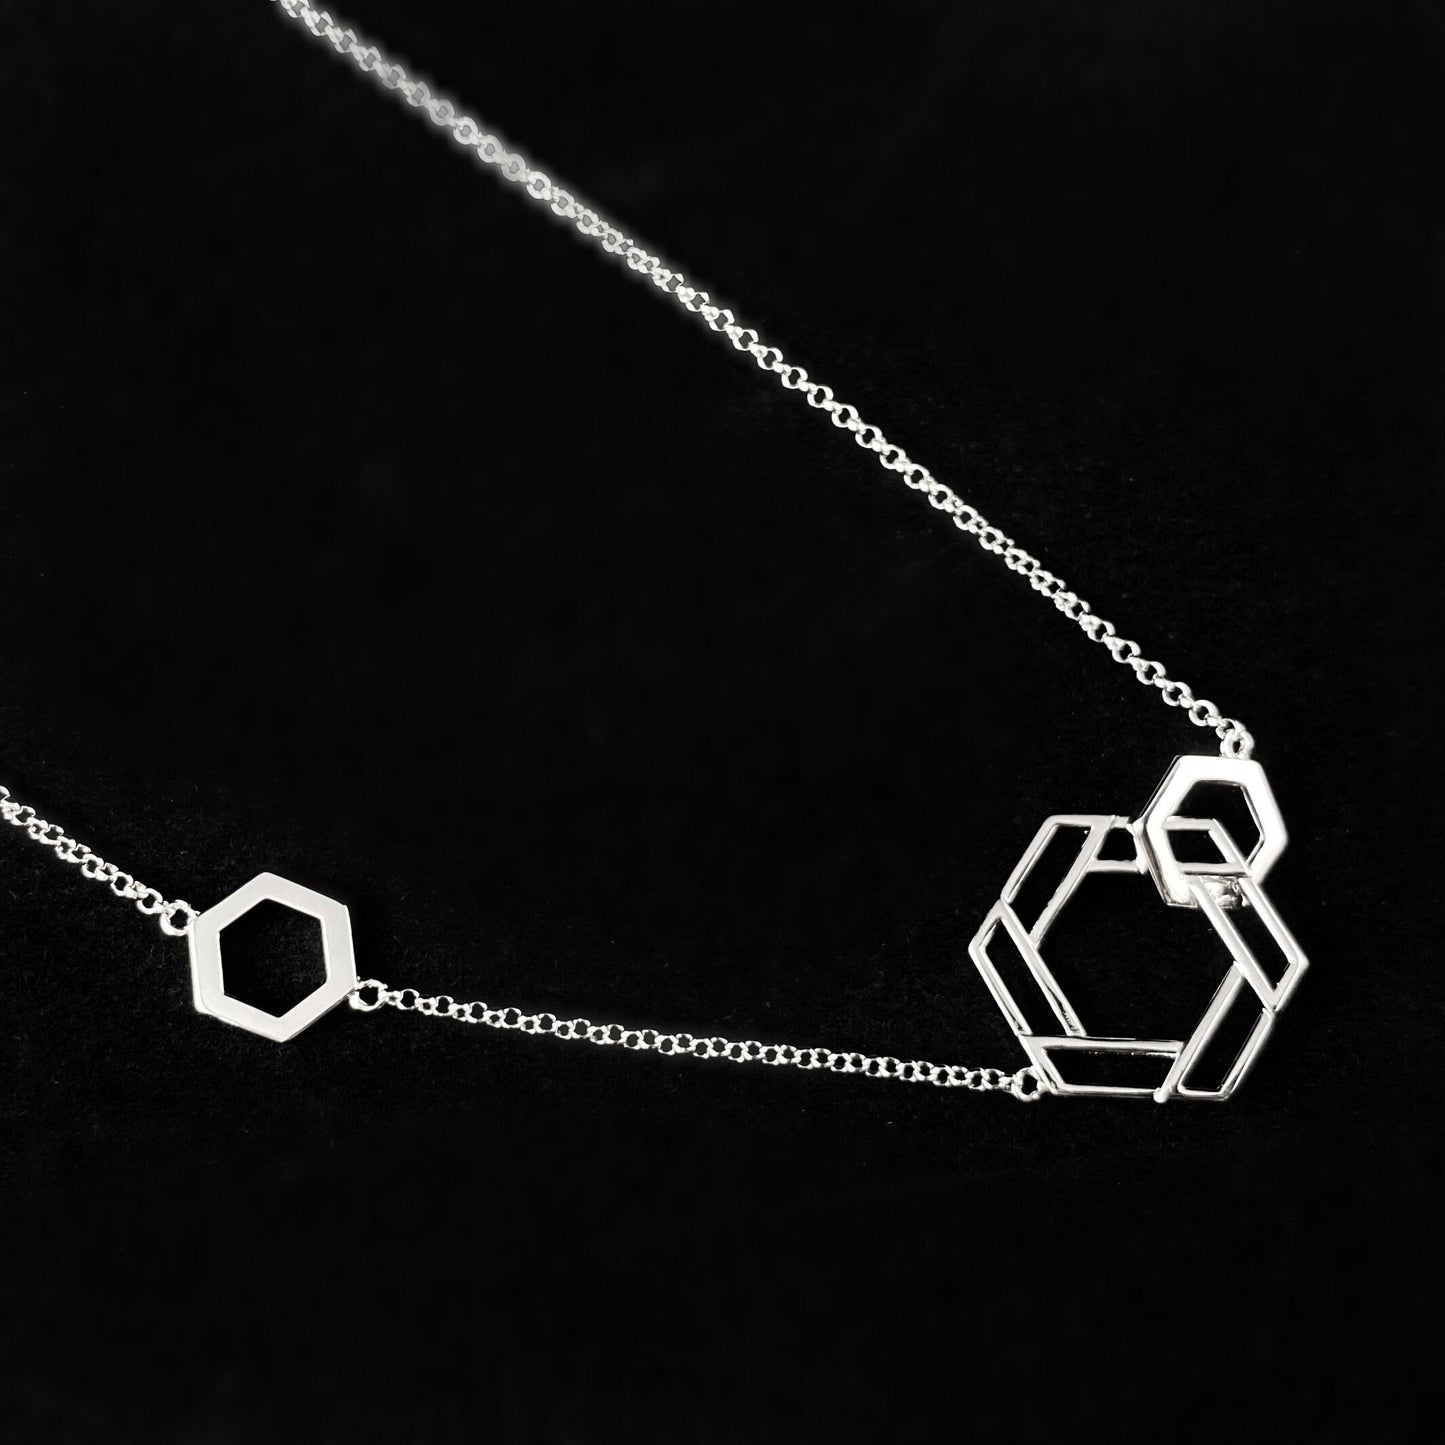 925 Sterling Silver Intertwined Hexagon Necklace - Elle Jewelry